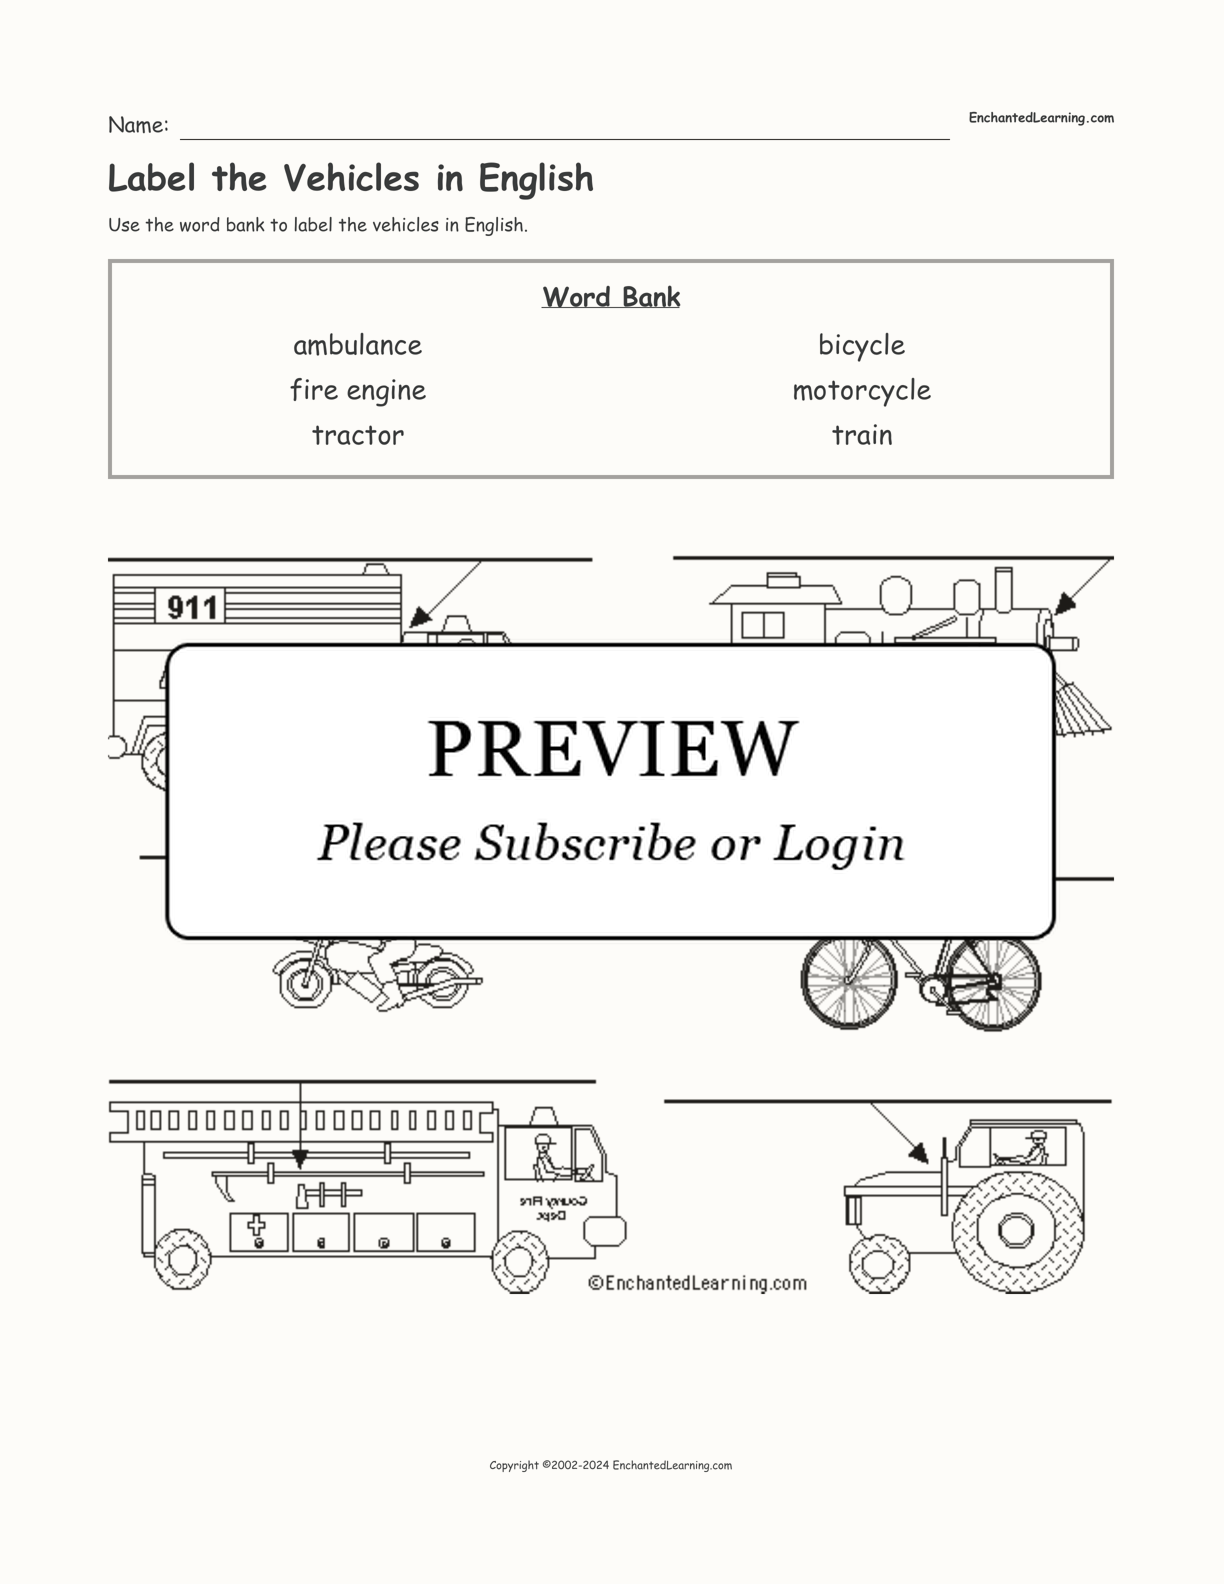 Label the Vehicles in English interactive worksheet page 1